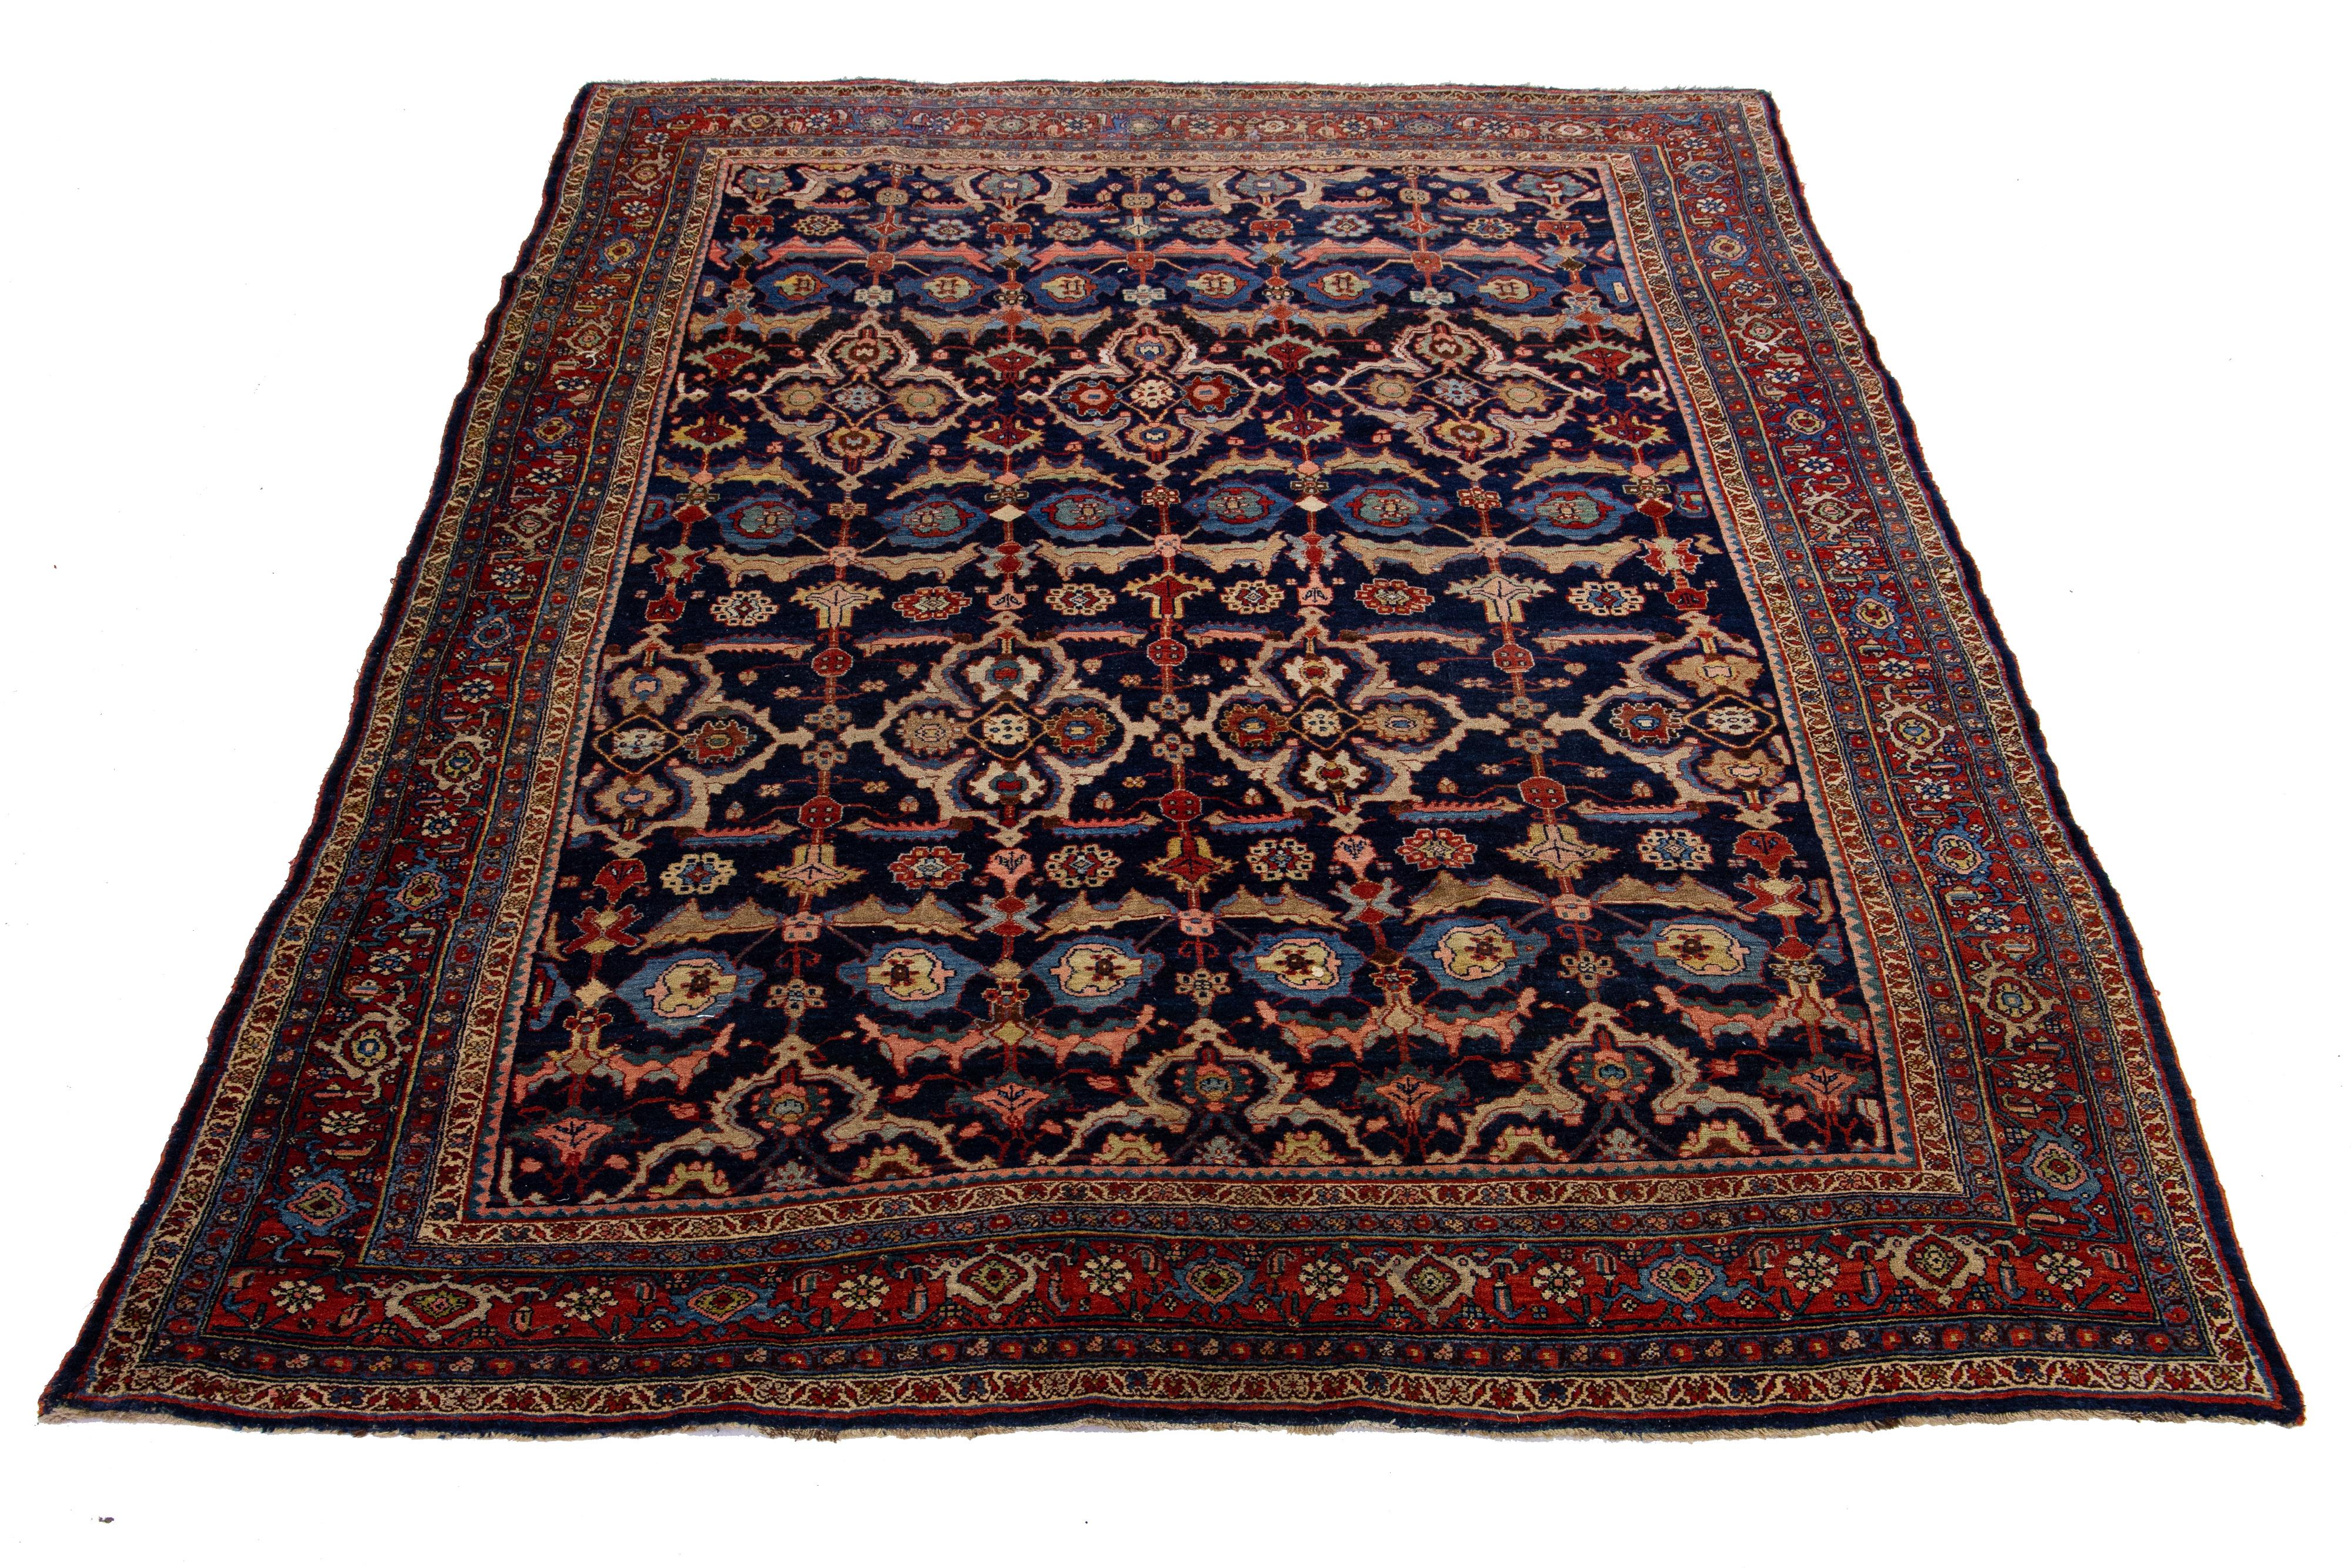 Beautiful antique Bidjar hand-knotted wool rug with a navy blue color field. This Persian rug has a red frame with multicolor accents in a gorgeous all-over traditional floral design.

This rug measures 7'9